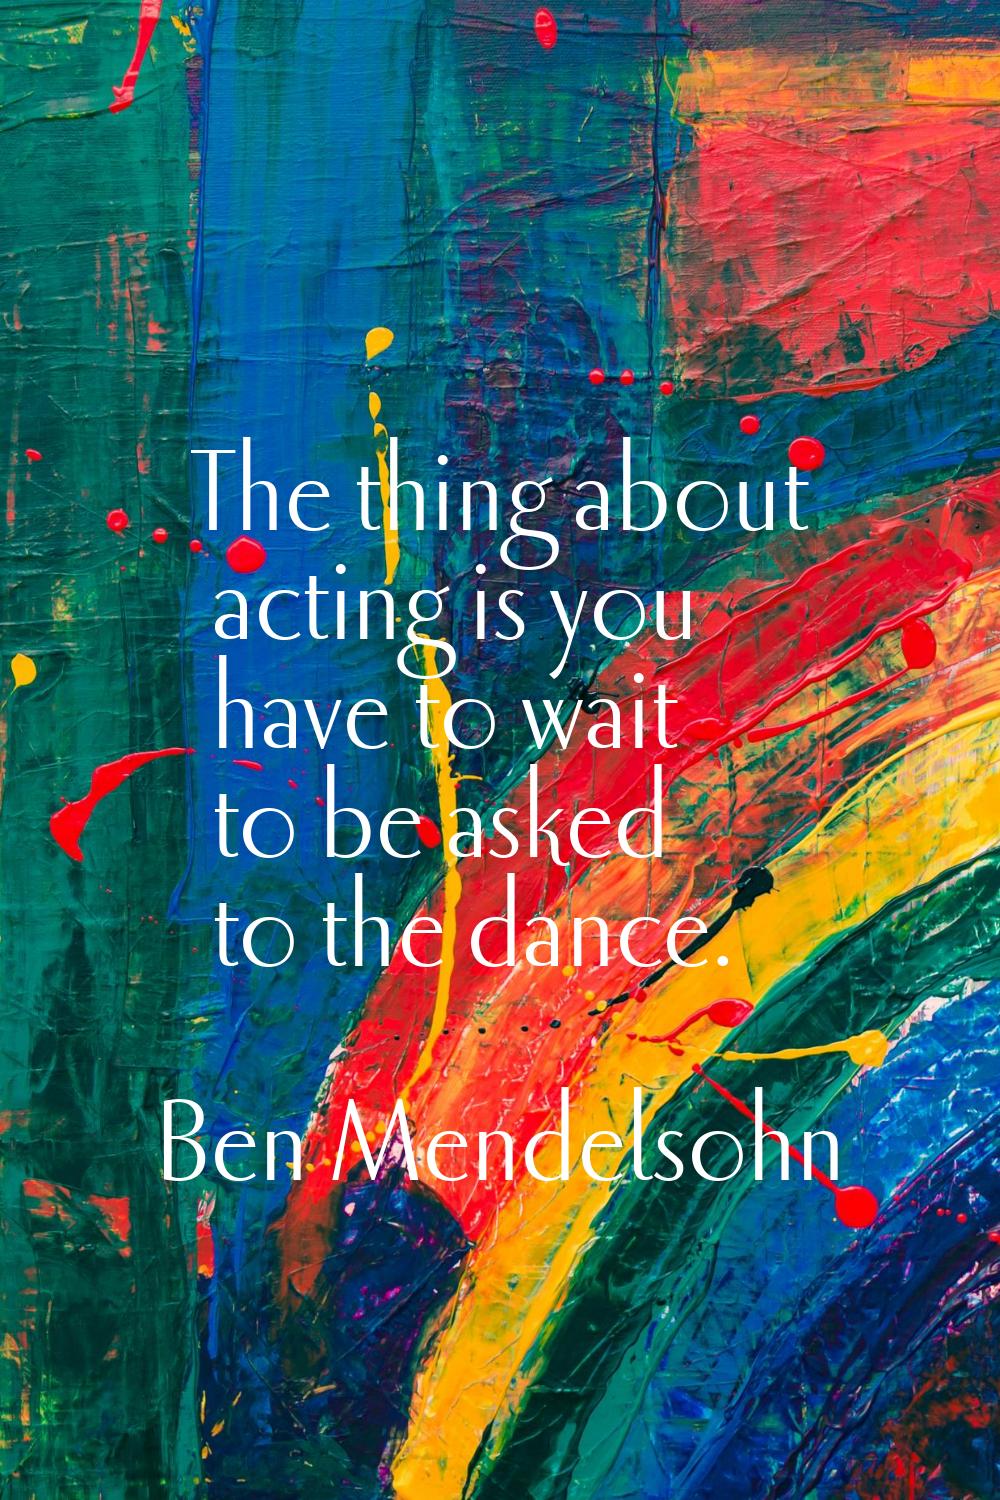 The thing about acting is you have to wait to be asked to the dance.